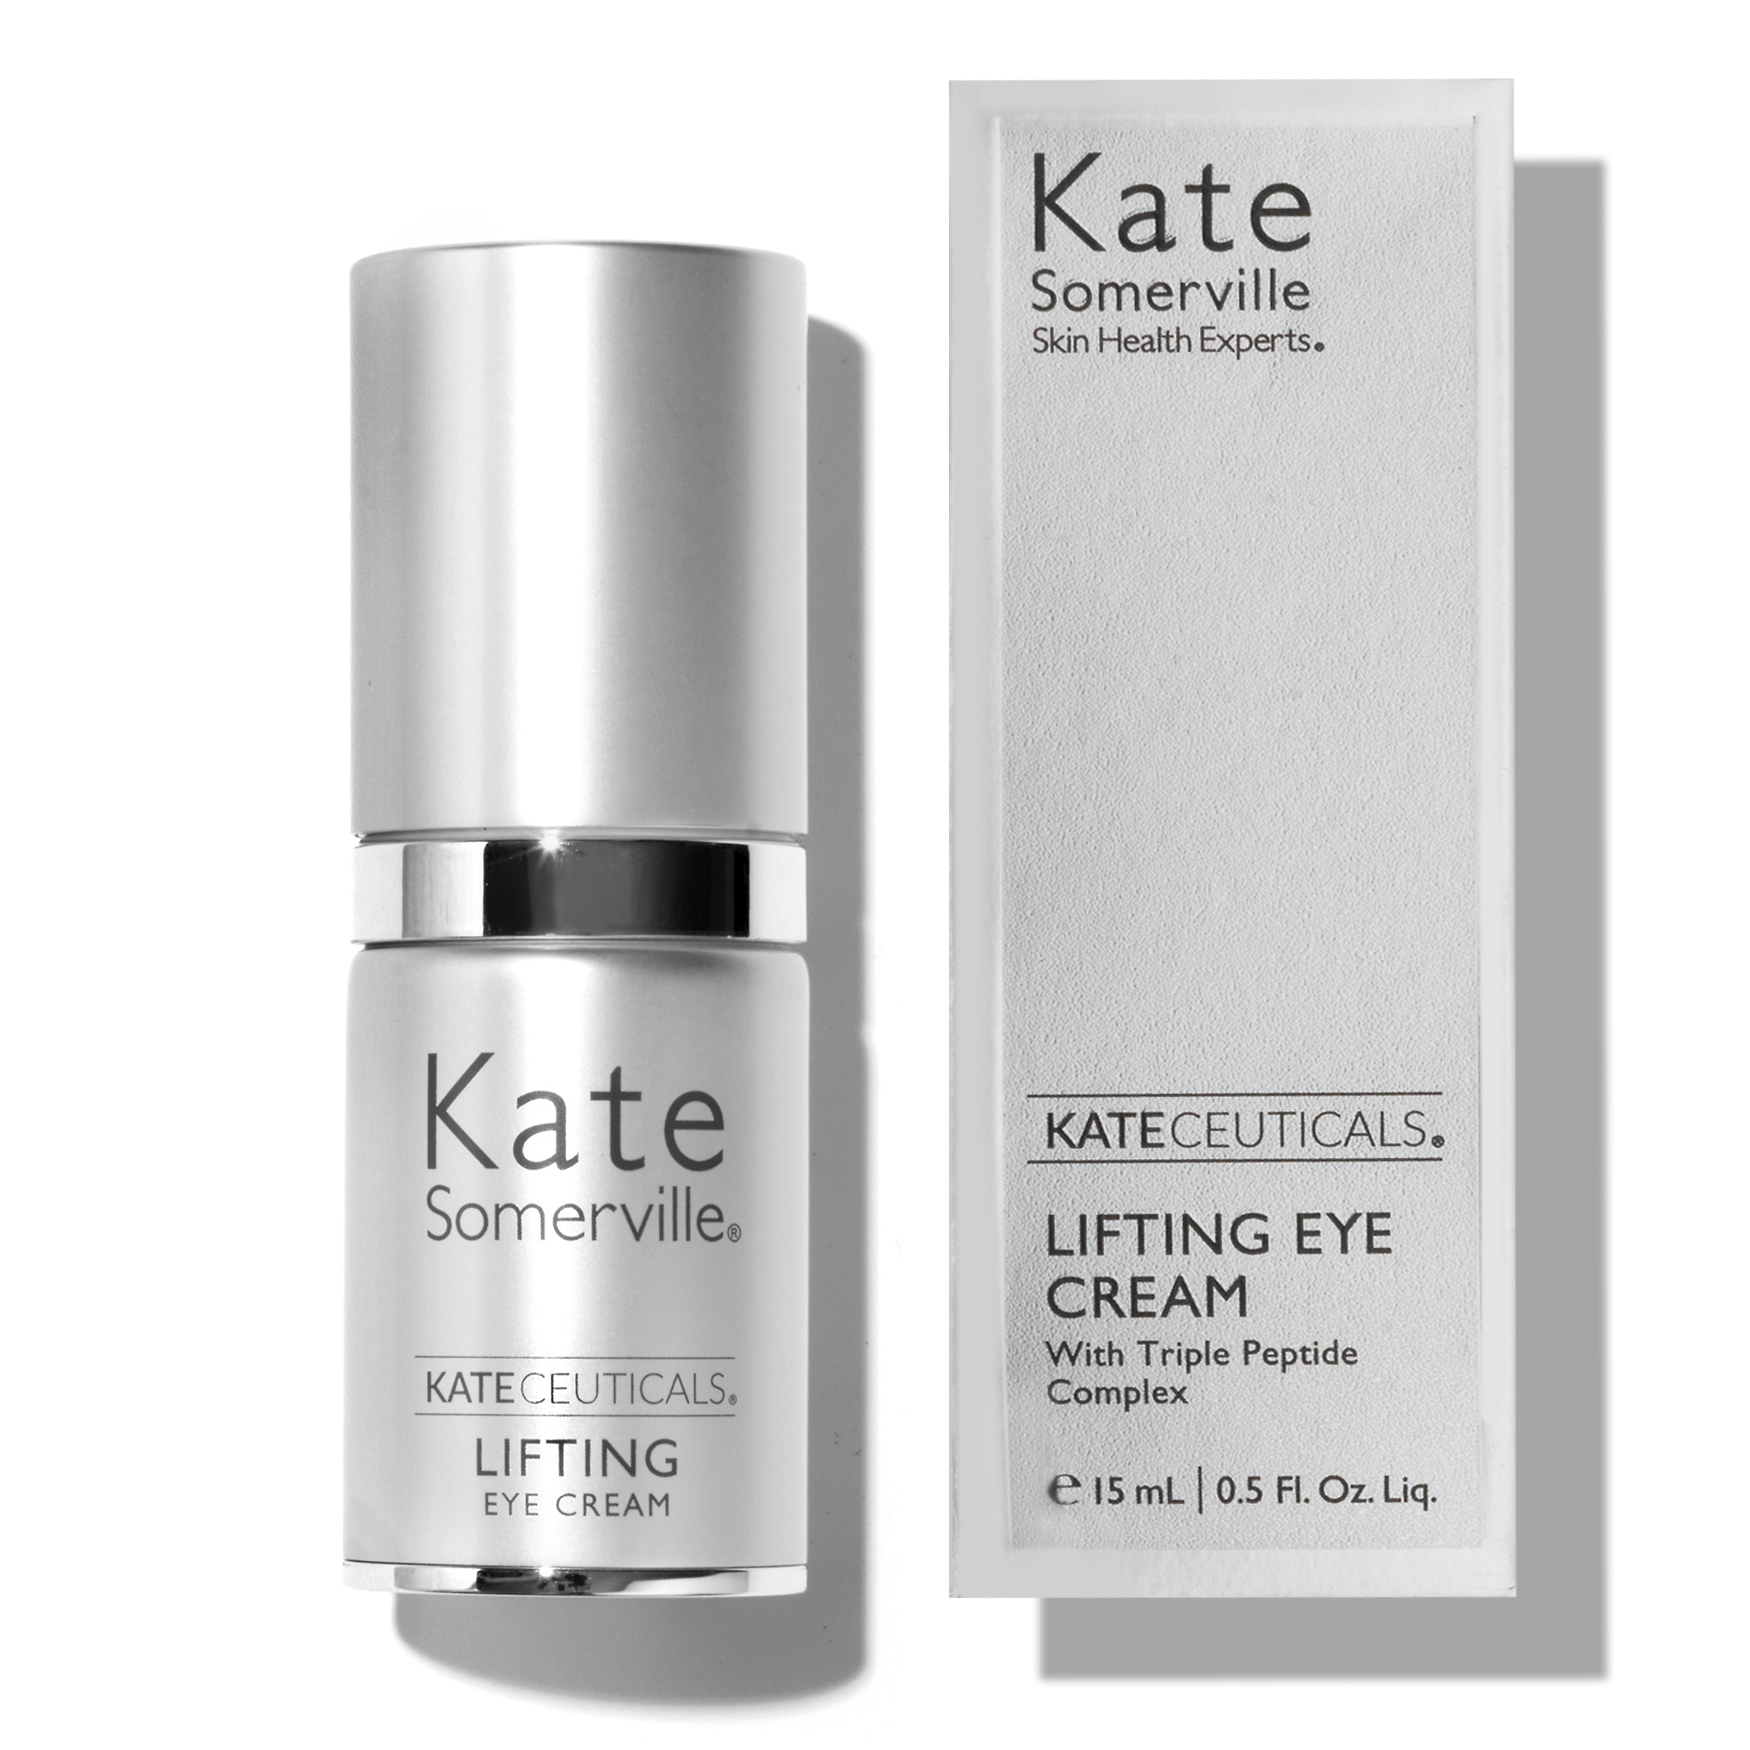 The best Kate Somerville products add skincare routine